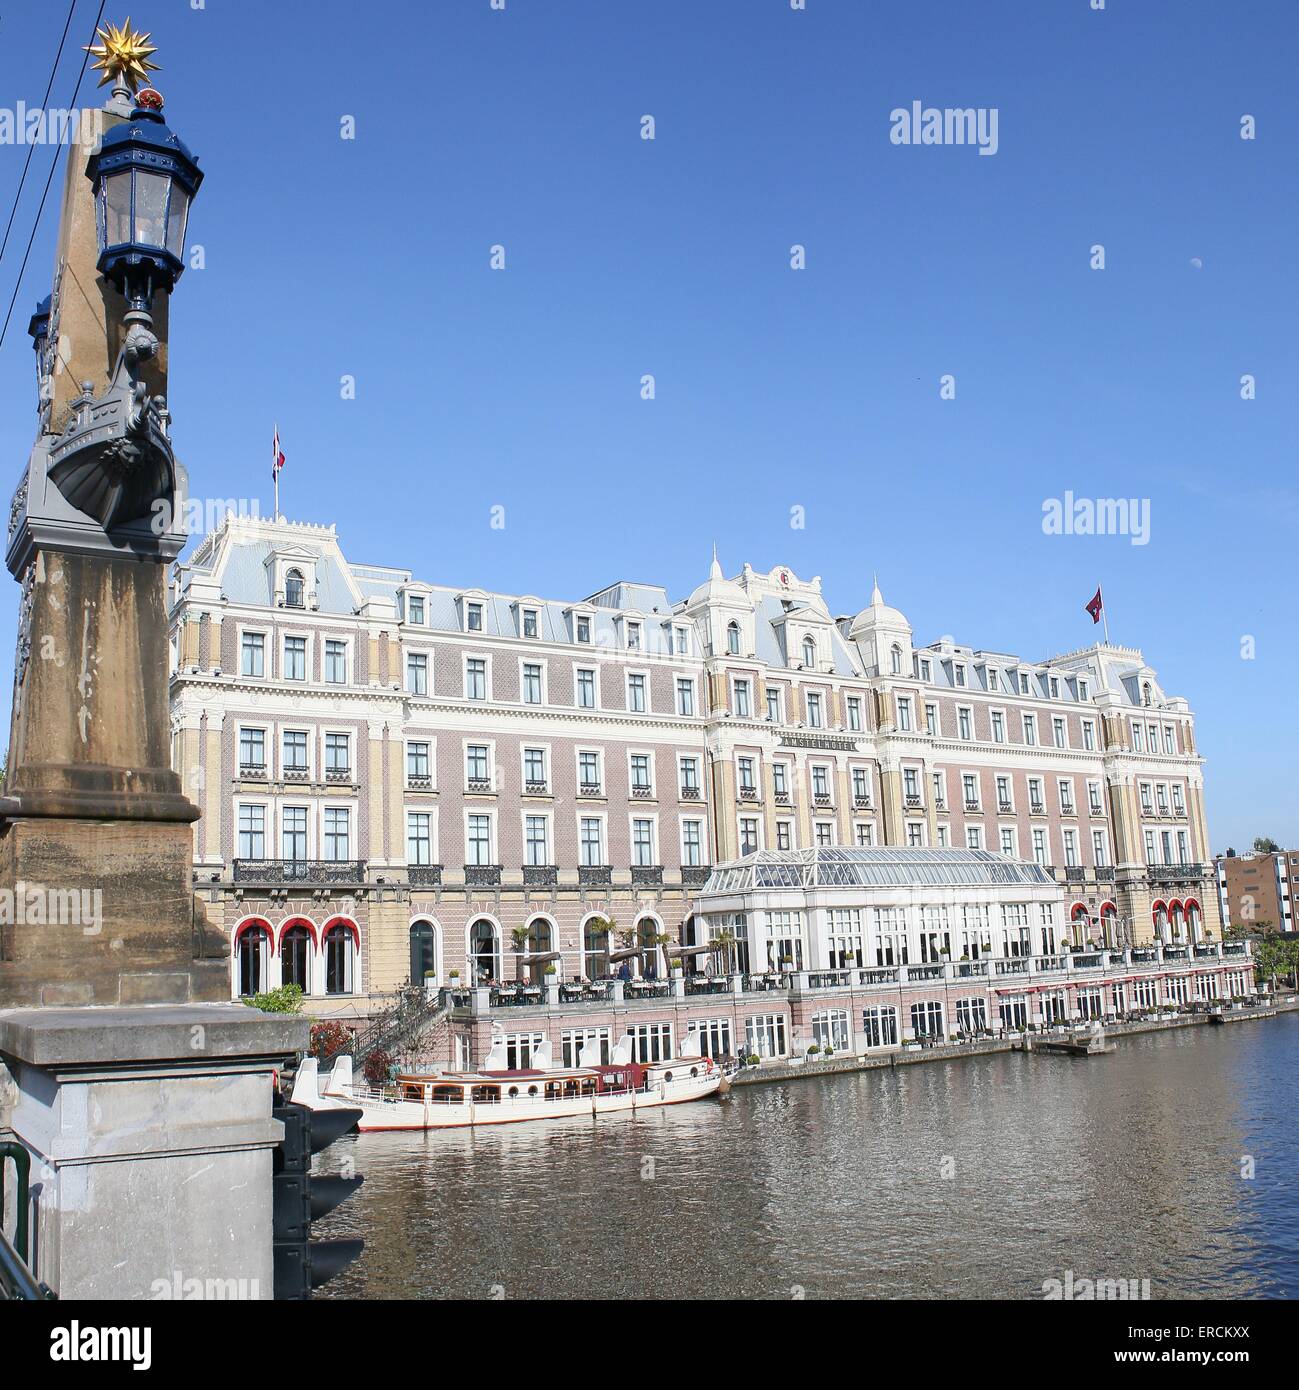 InterContinental Amstel Amsterdam Hotel or Amstel Hotel, luxurious hotel in Amsterdam, Netherlands, on the river Amstel Stock Photo